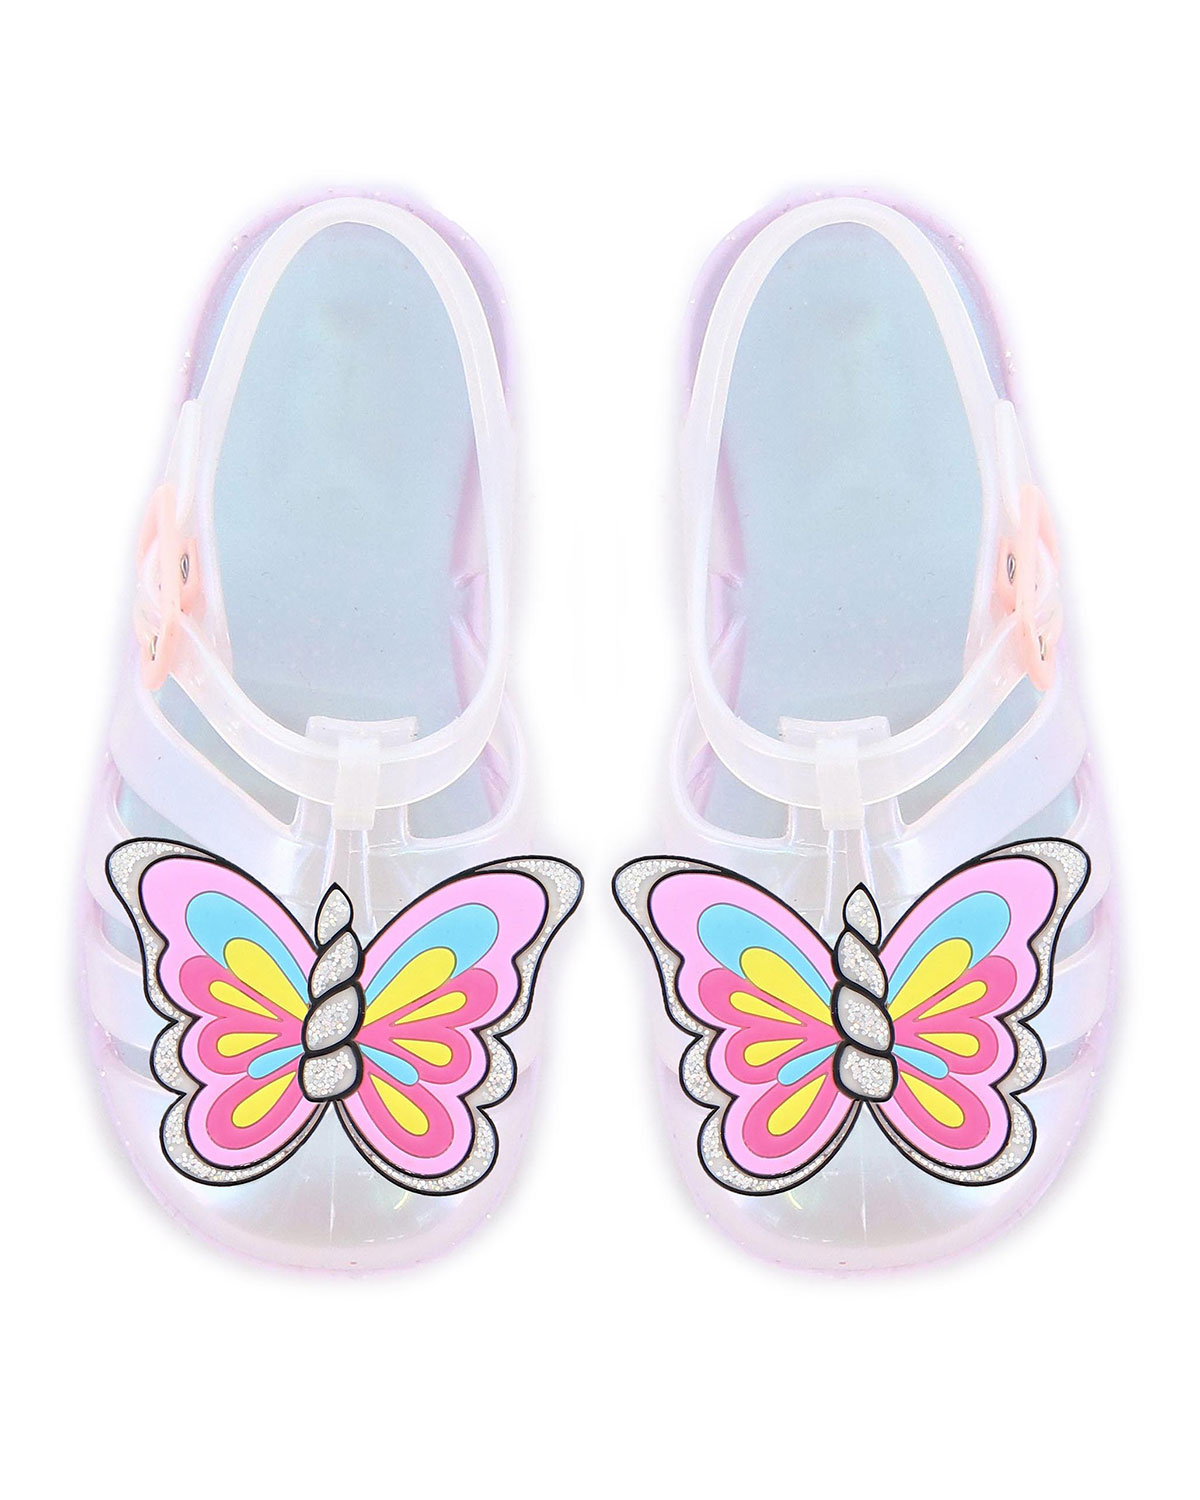 SOPHIA WEBSTER GIRL'S UNICORN HORN & BUTTERFLY WING JELLY SANDALS, BABY/TODDLERS,PROD237680145